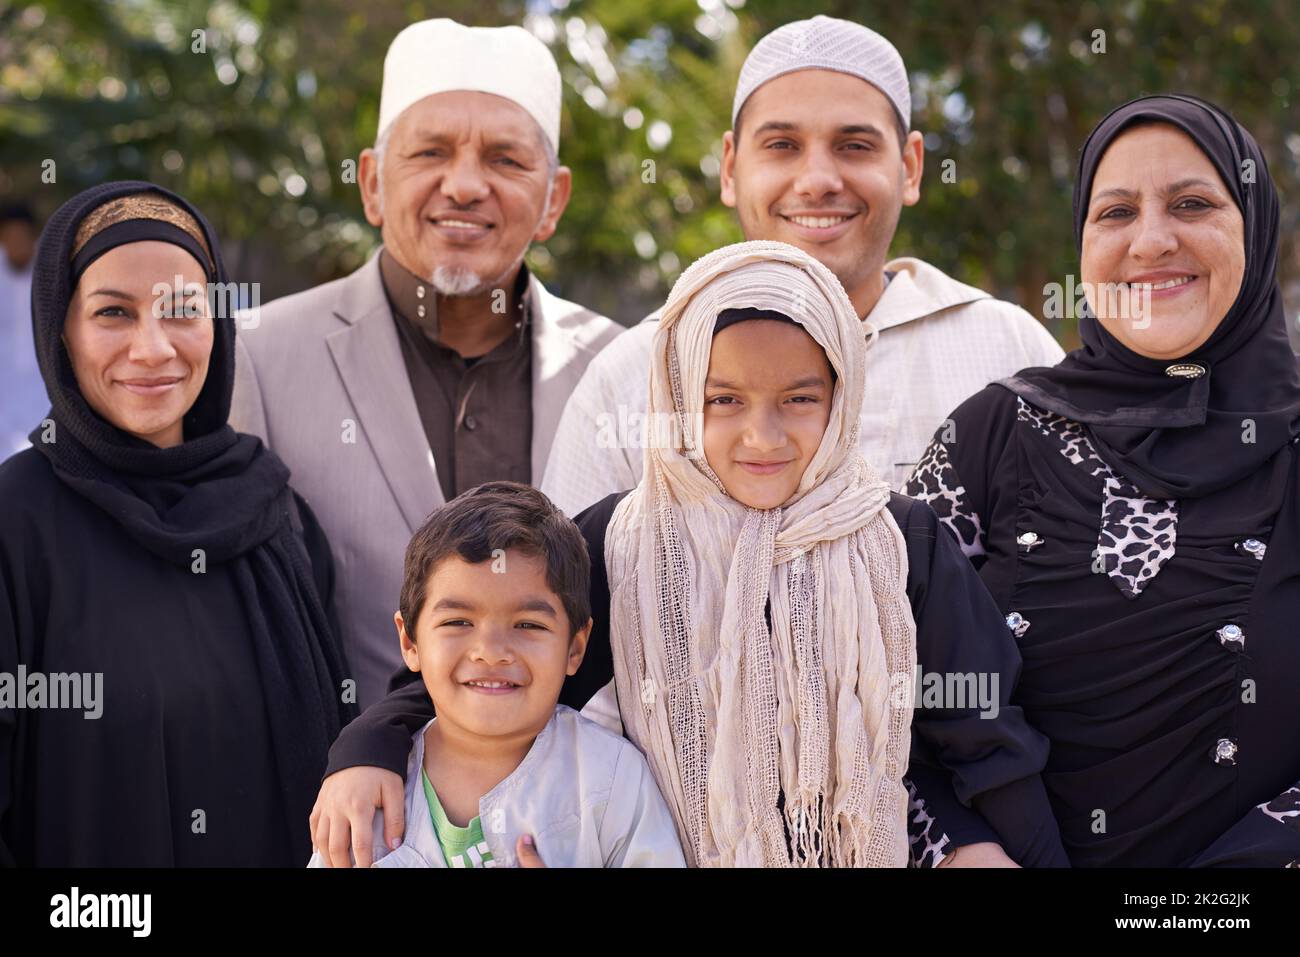 Family day out. A muslim family enjoying a day outside. Stock Photo